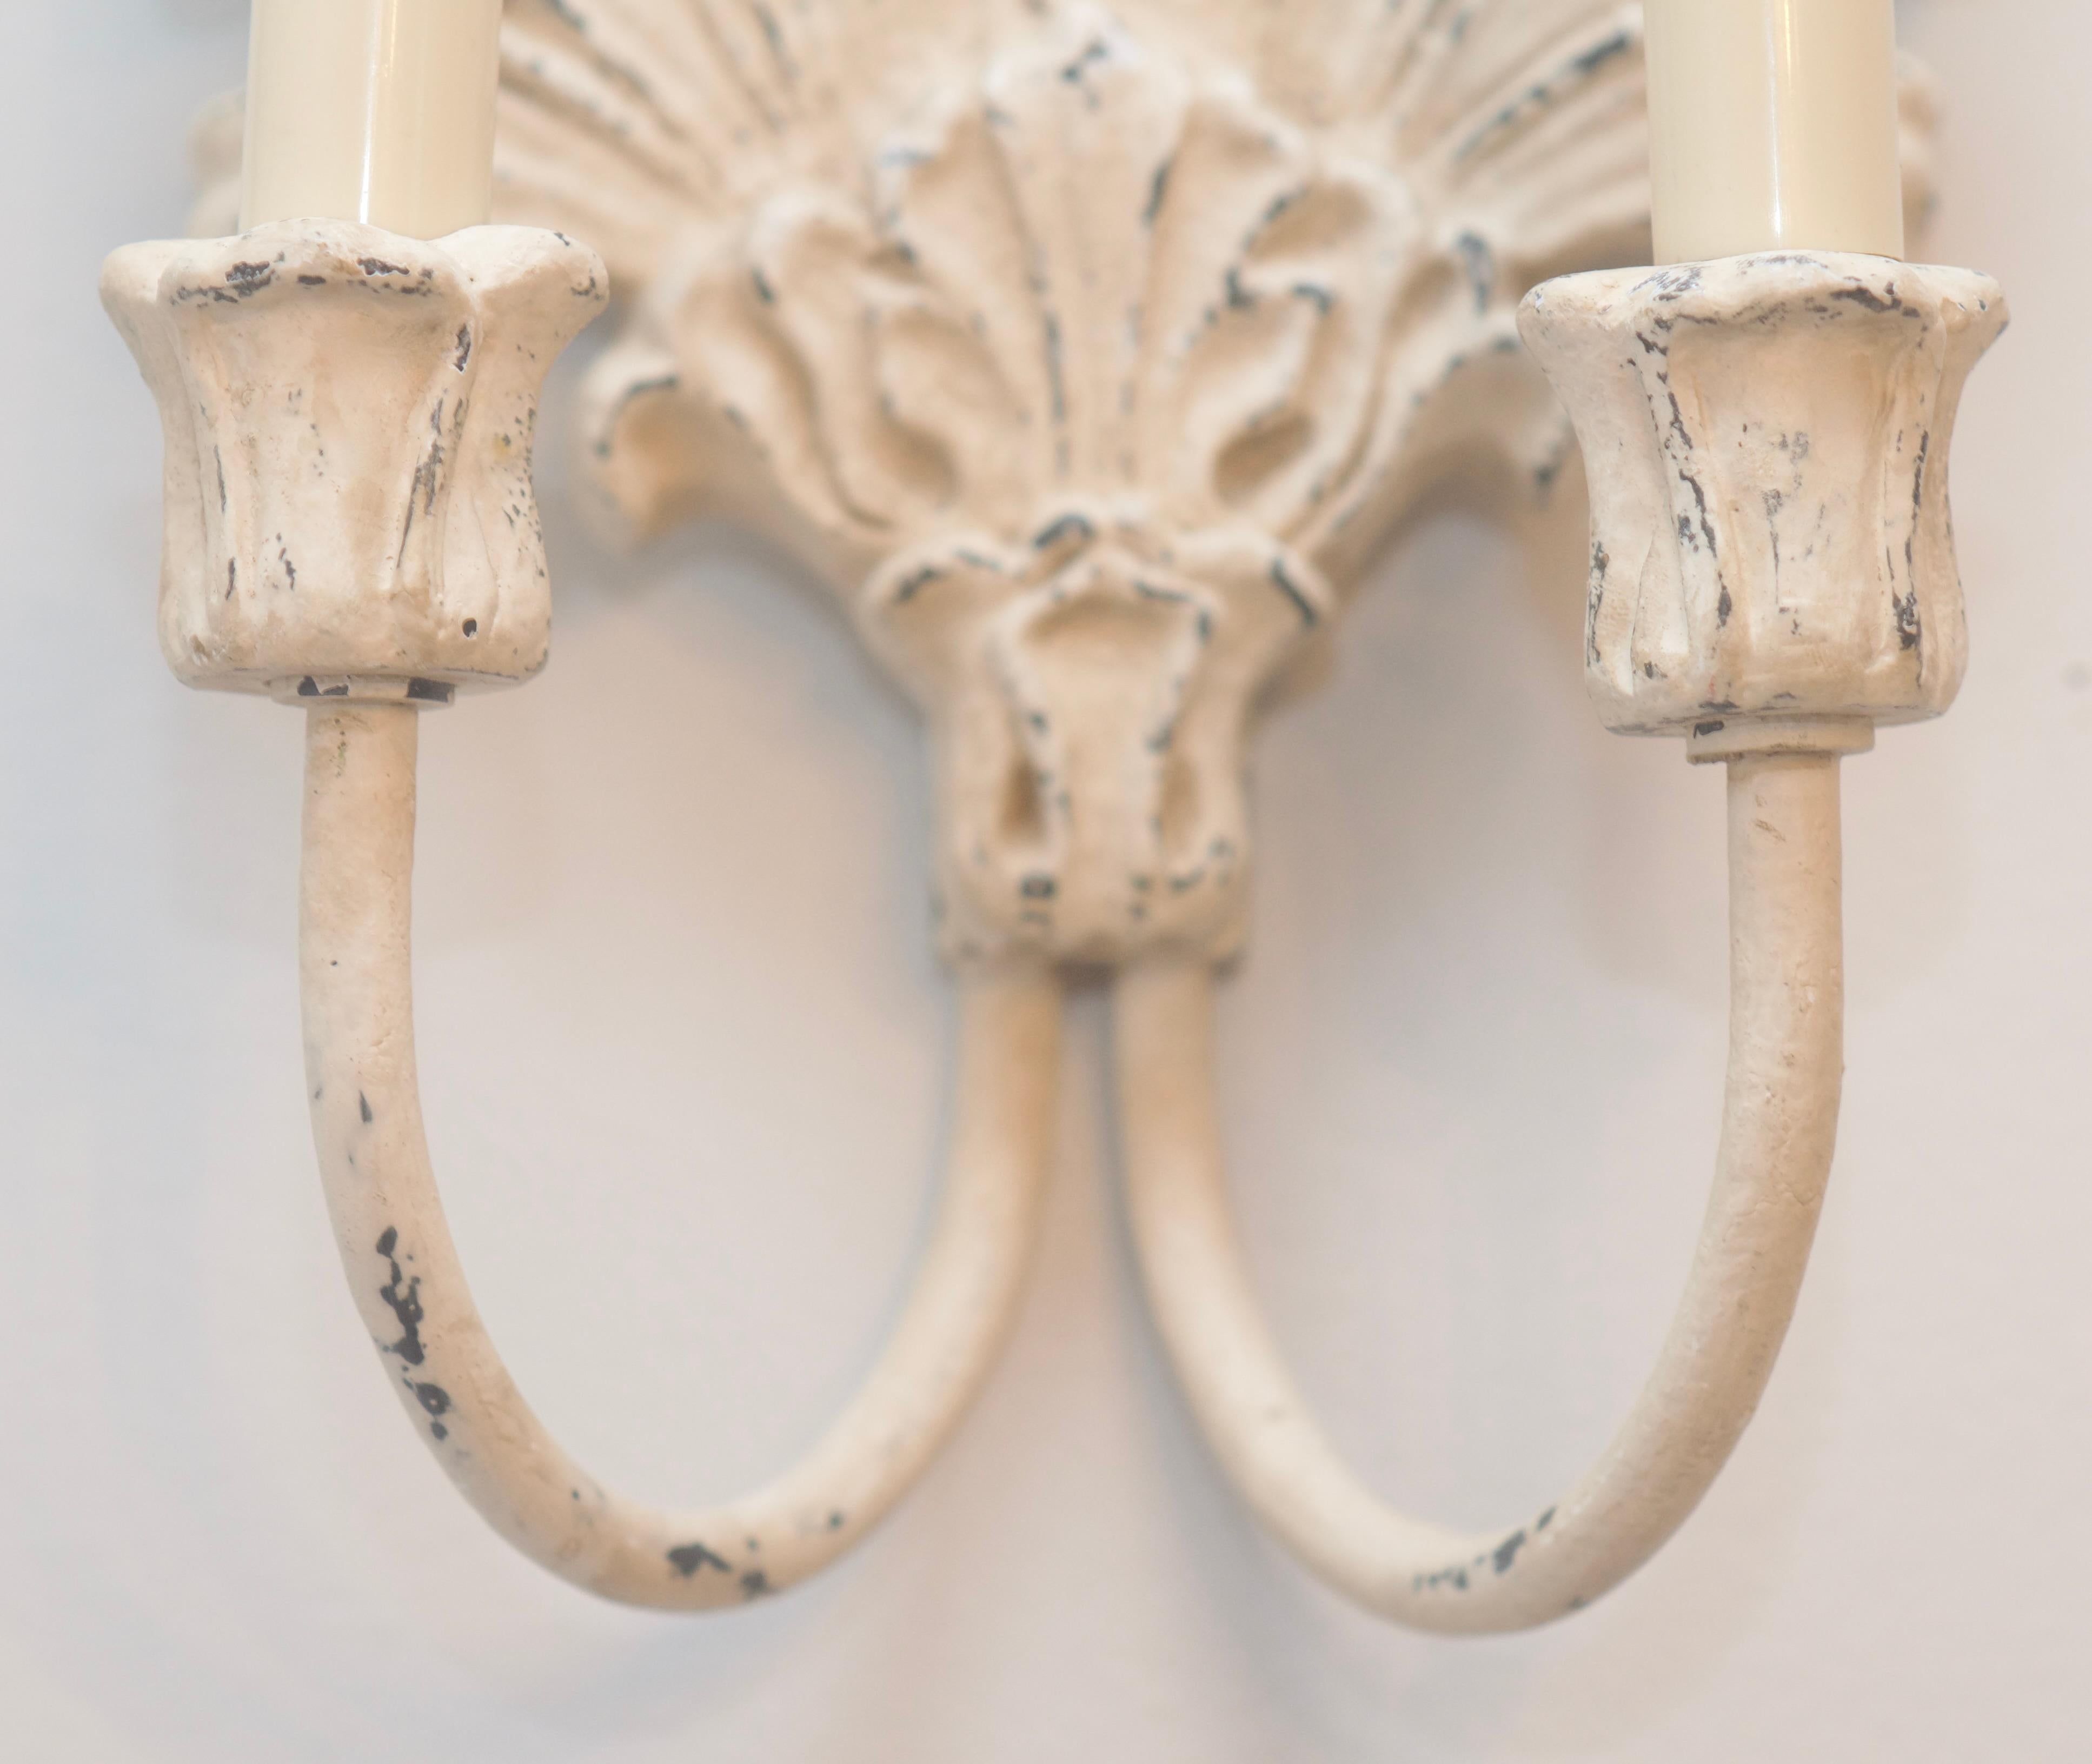 French Country Double Sconce in a sophisticated shell pattern.  Original finish includes cream paint over metal color with a natural distressed patina.  Set of two.  Each sconce has two arms.  Hardwired into the wall, these will make a beautiful